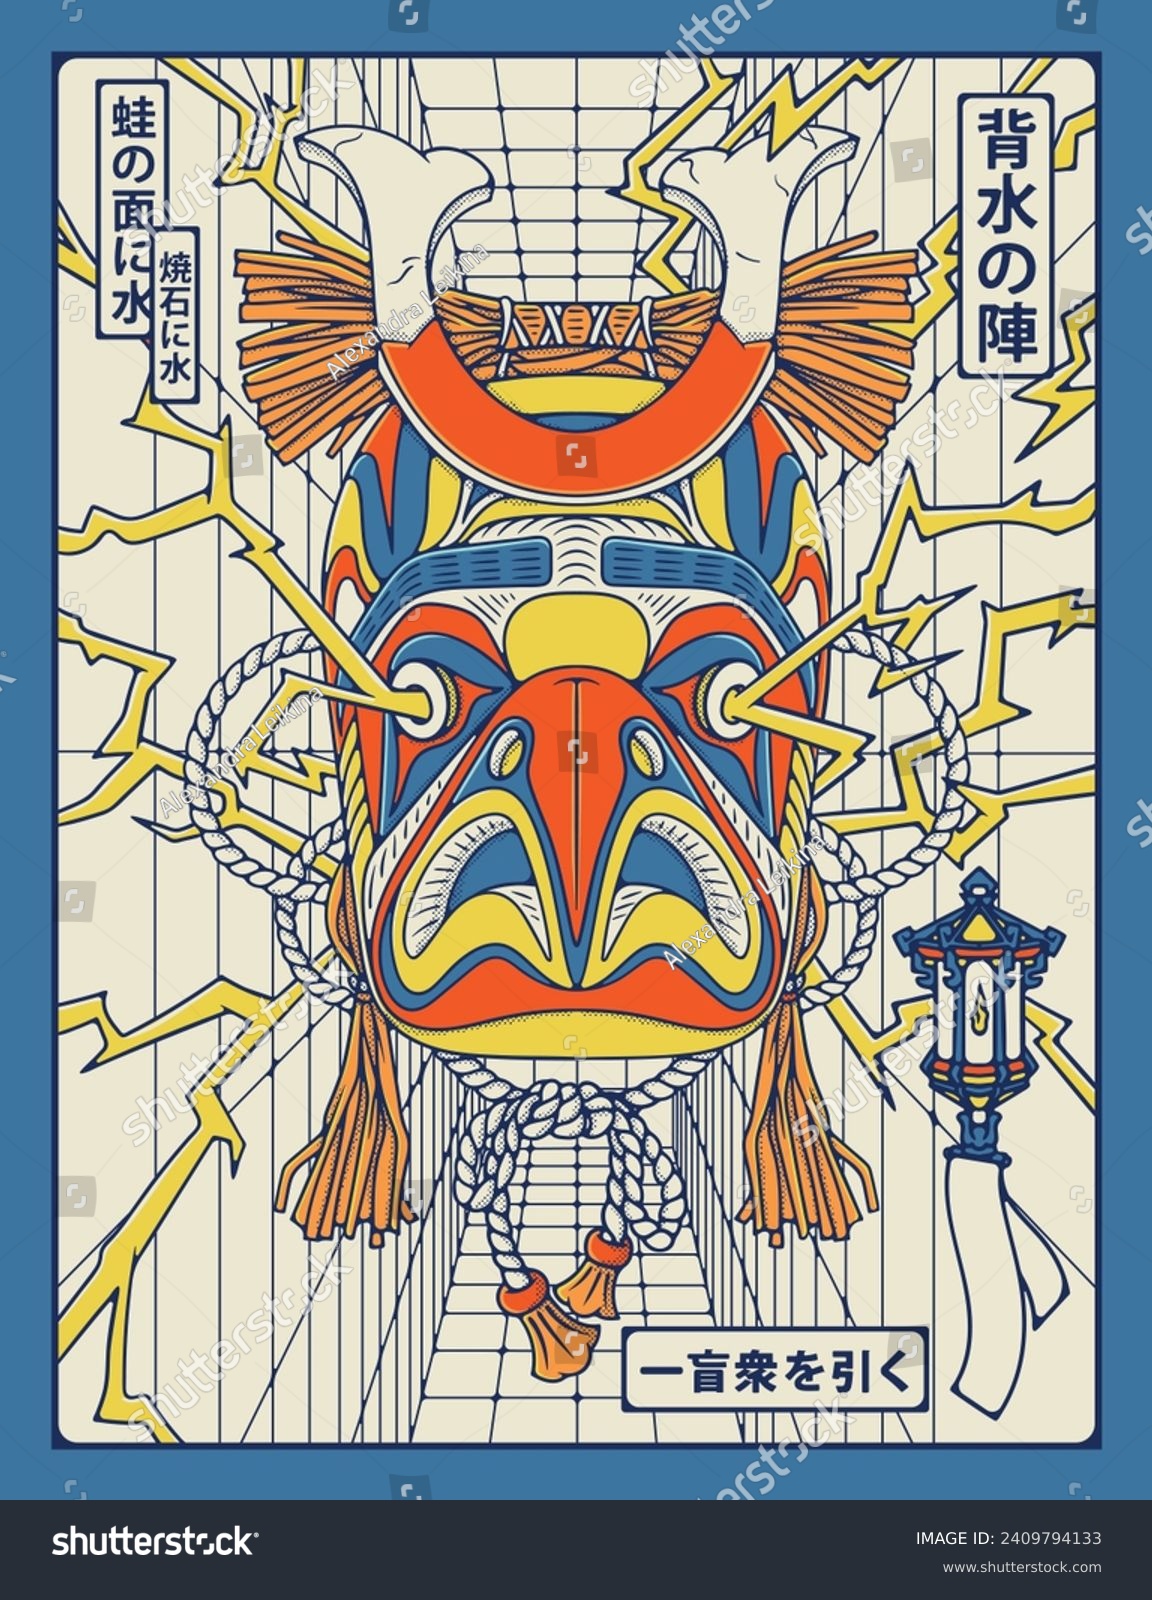 SVG of Native American totem mask fused with Japanese elements. The Kanji in the illustration mean 'last standing', 'if the blind leads the blind they both fall in the ditch' and 'water off a duck's back'. svg